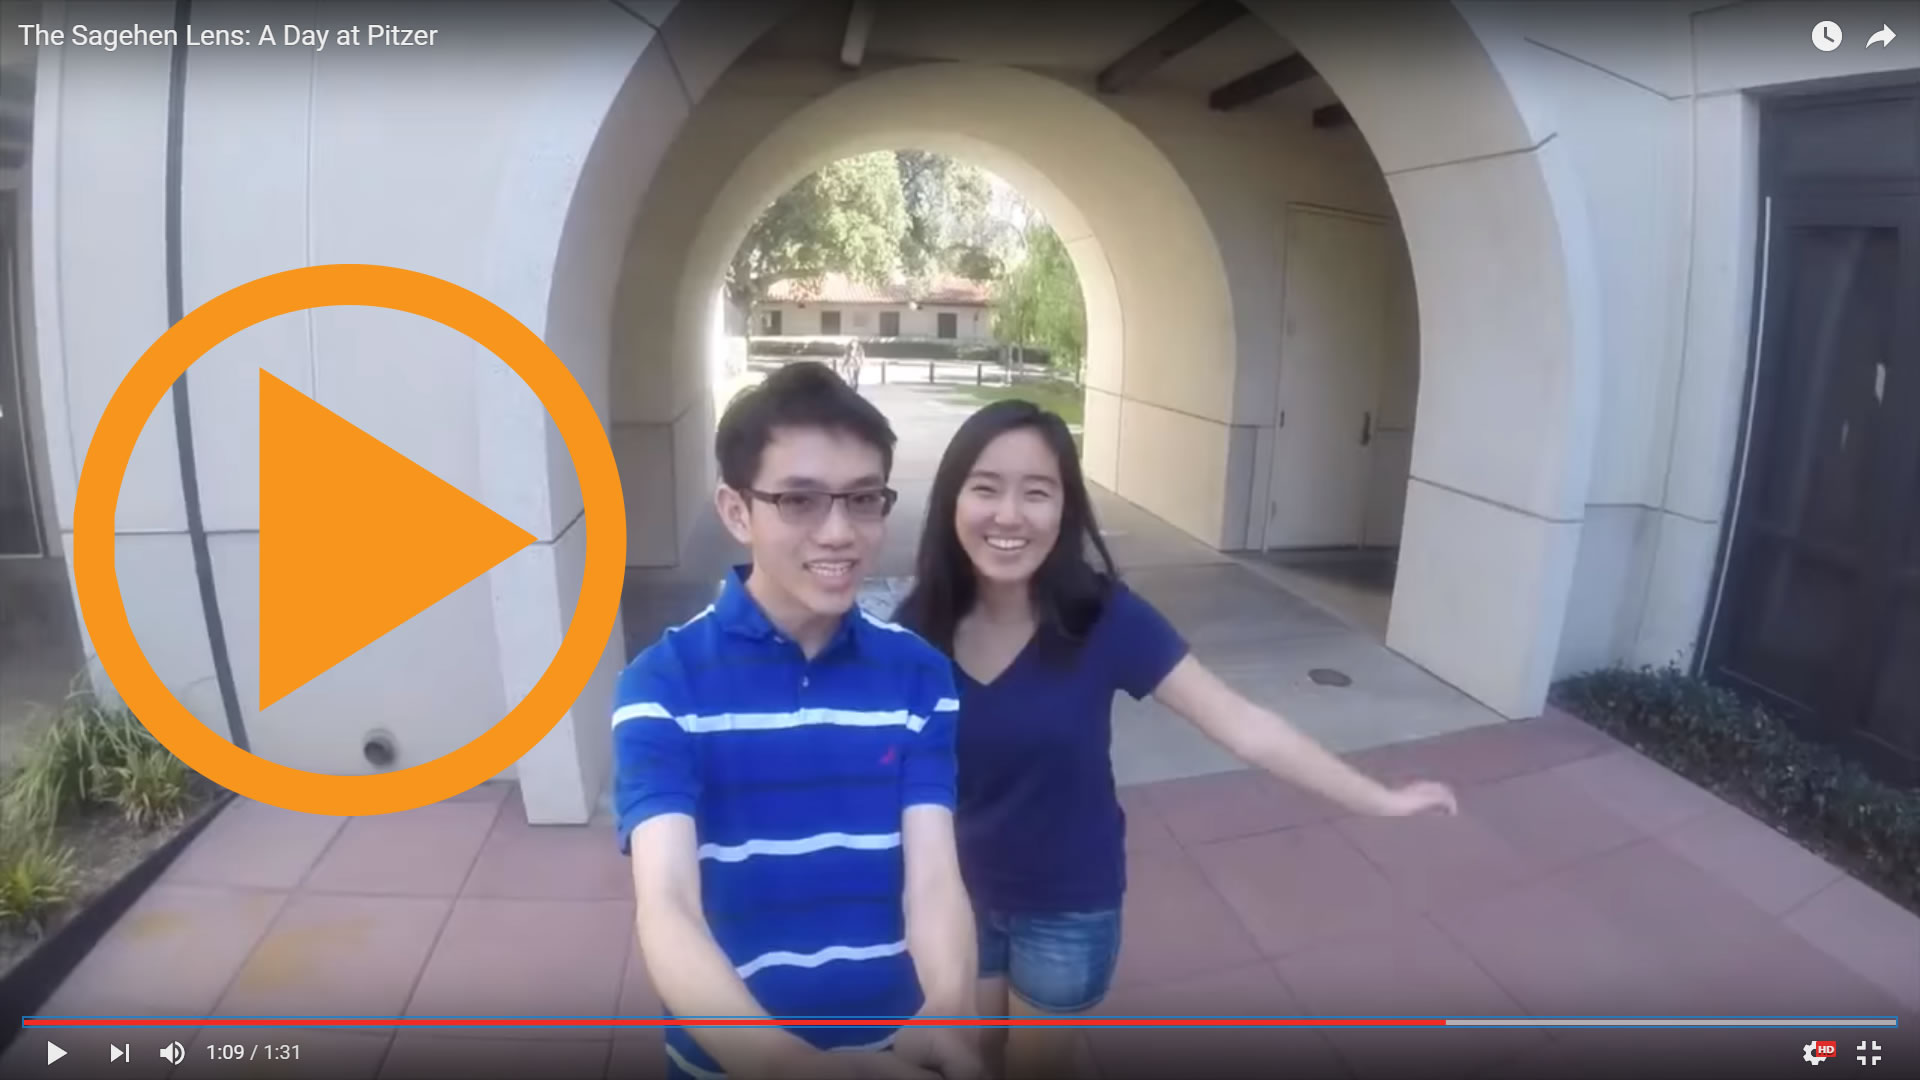 Video: The Sagehens Lens: A Day at Pitzer